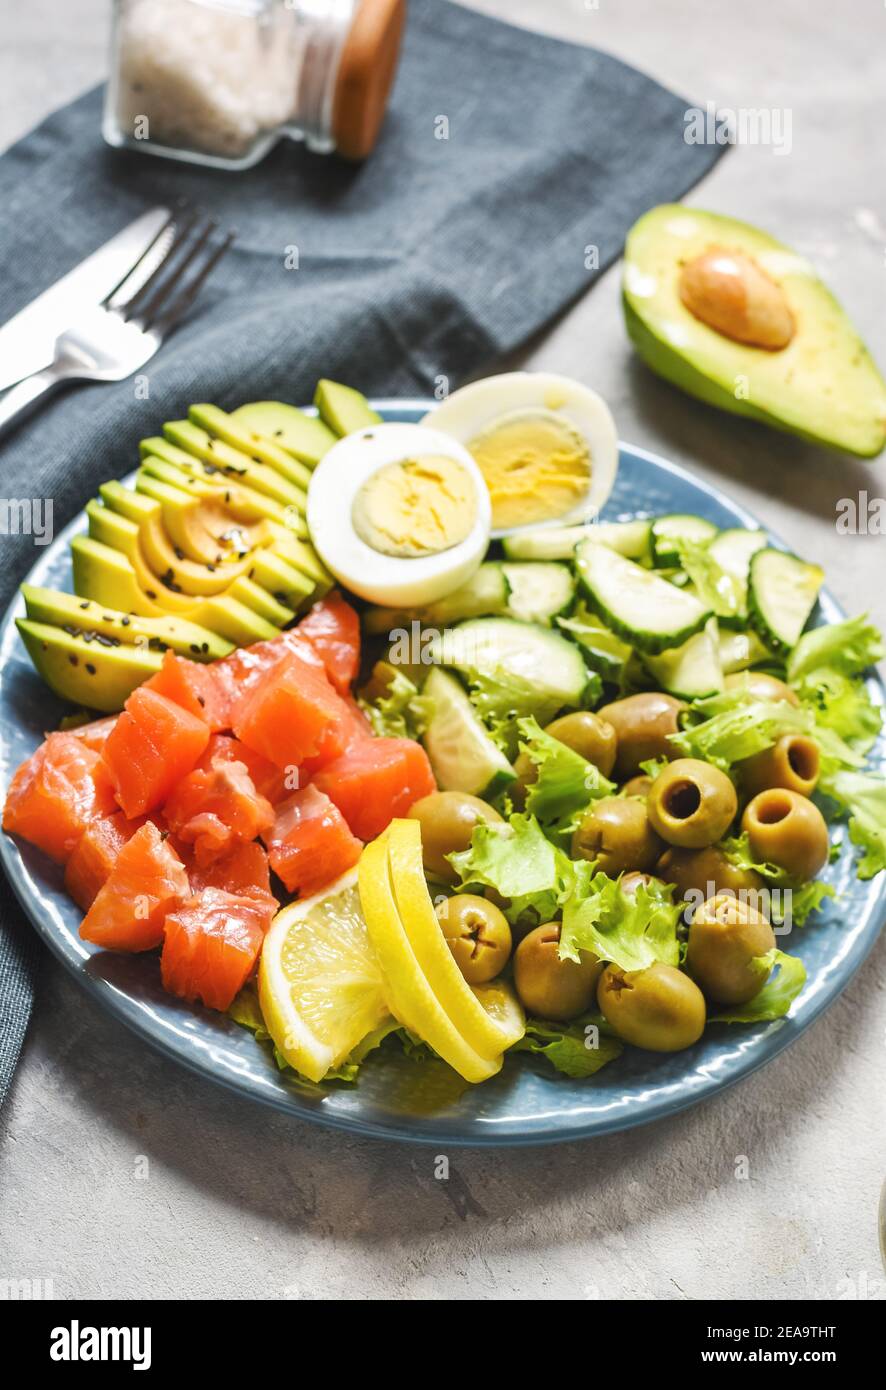 Ketogenic, paleo diet lunch bowl with salted salmon fish, lemon, avocado, olives, boiled egg, cucumber, green lettuce salad, healthy food trend Stock Photo